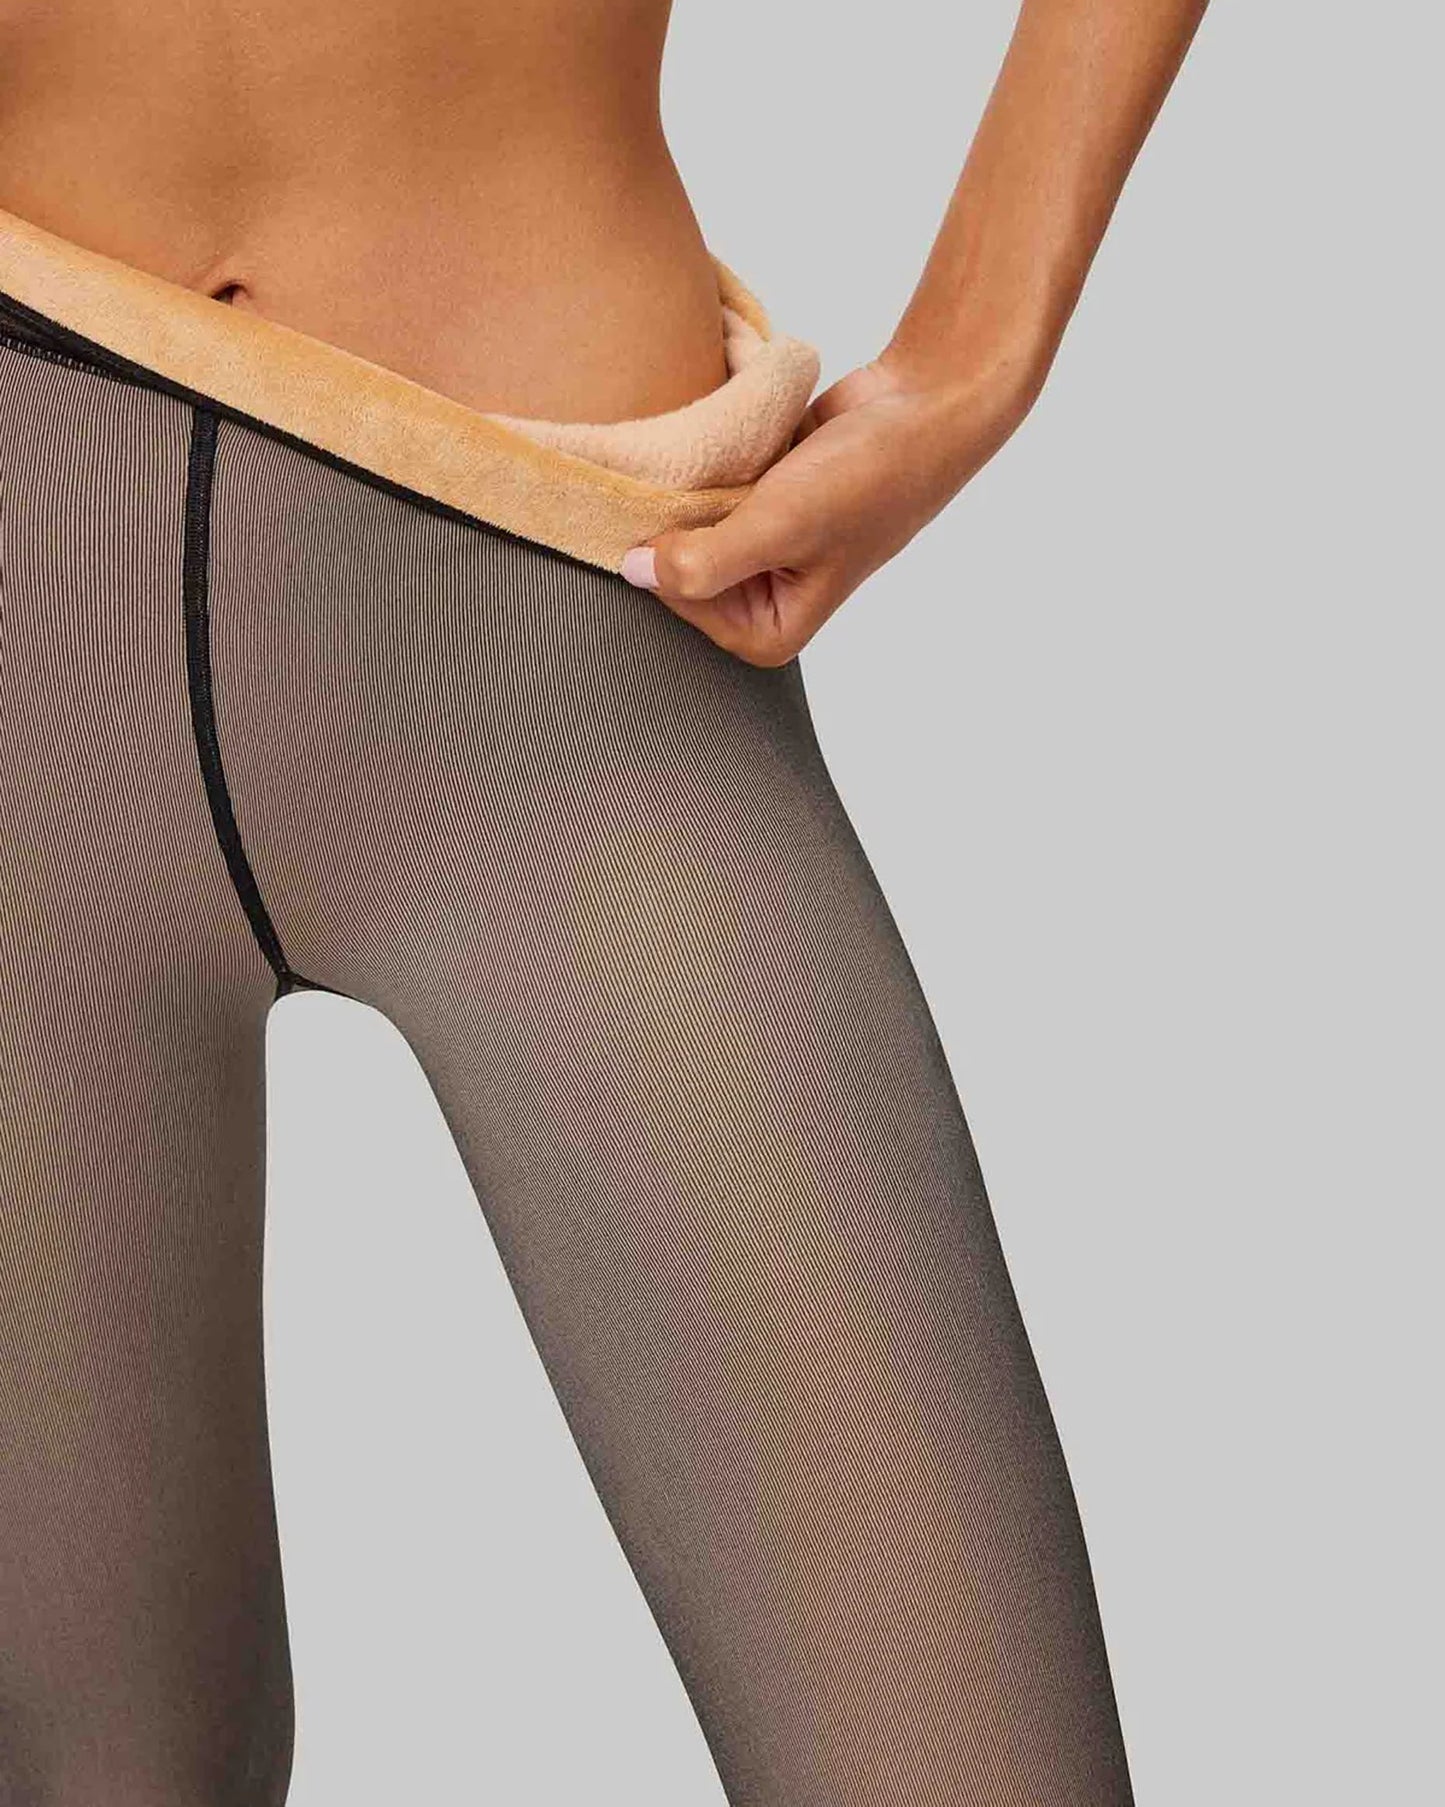 Ysabel Mora 16610 Thermal Tights - Warm thermal tights that have a sheer effect. Inside layer is nude colour with warm plush fleece lining, outer layer is a sheer off black that gives the effect that the wearer is wearing a sheer black tight.